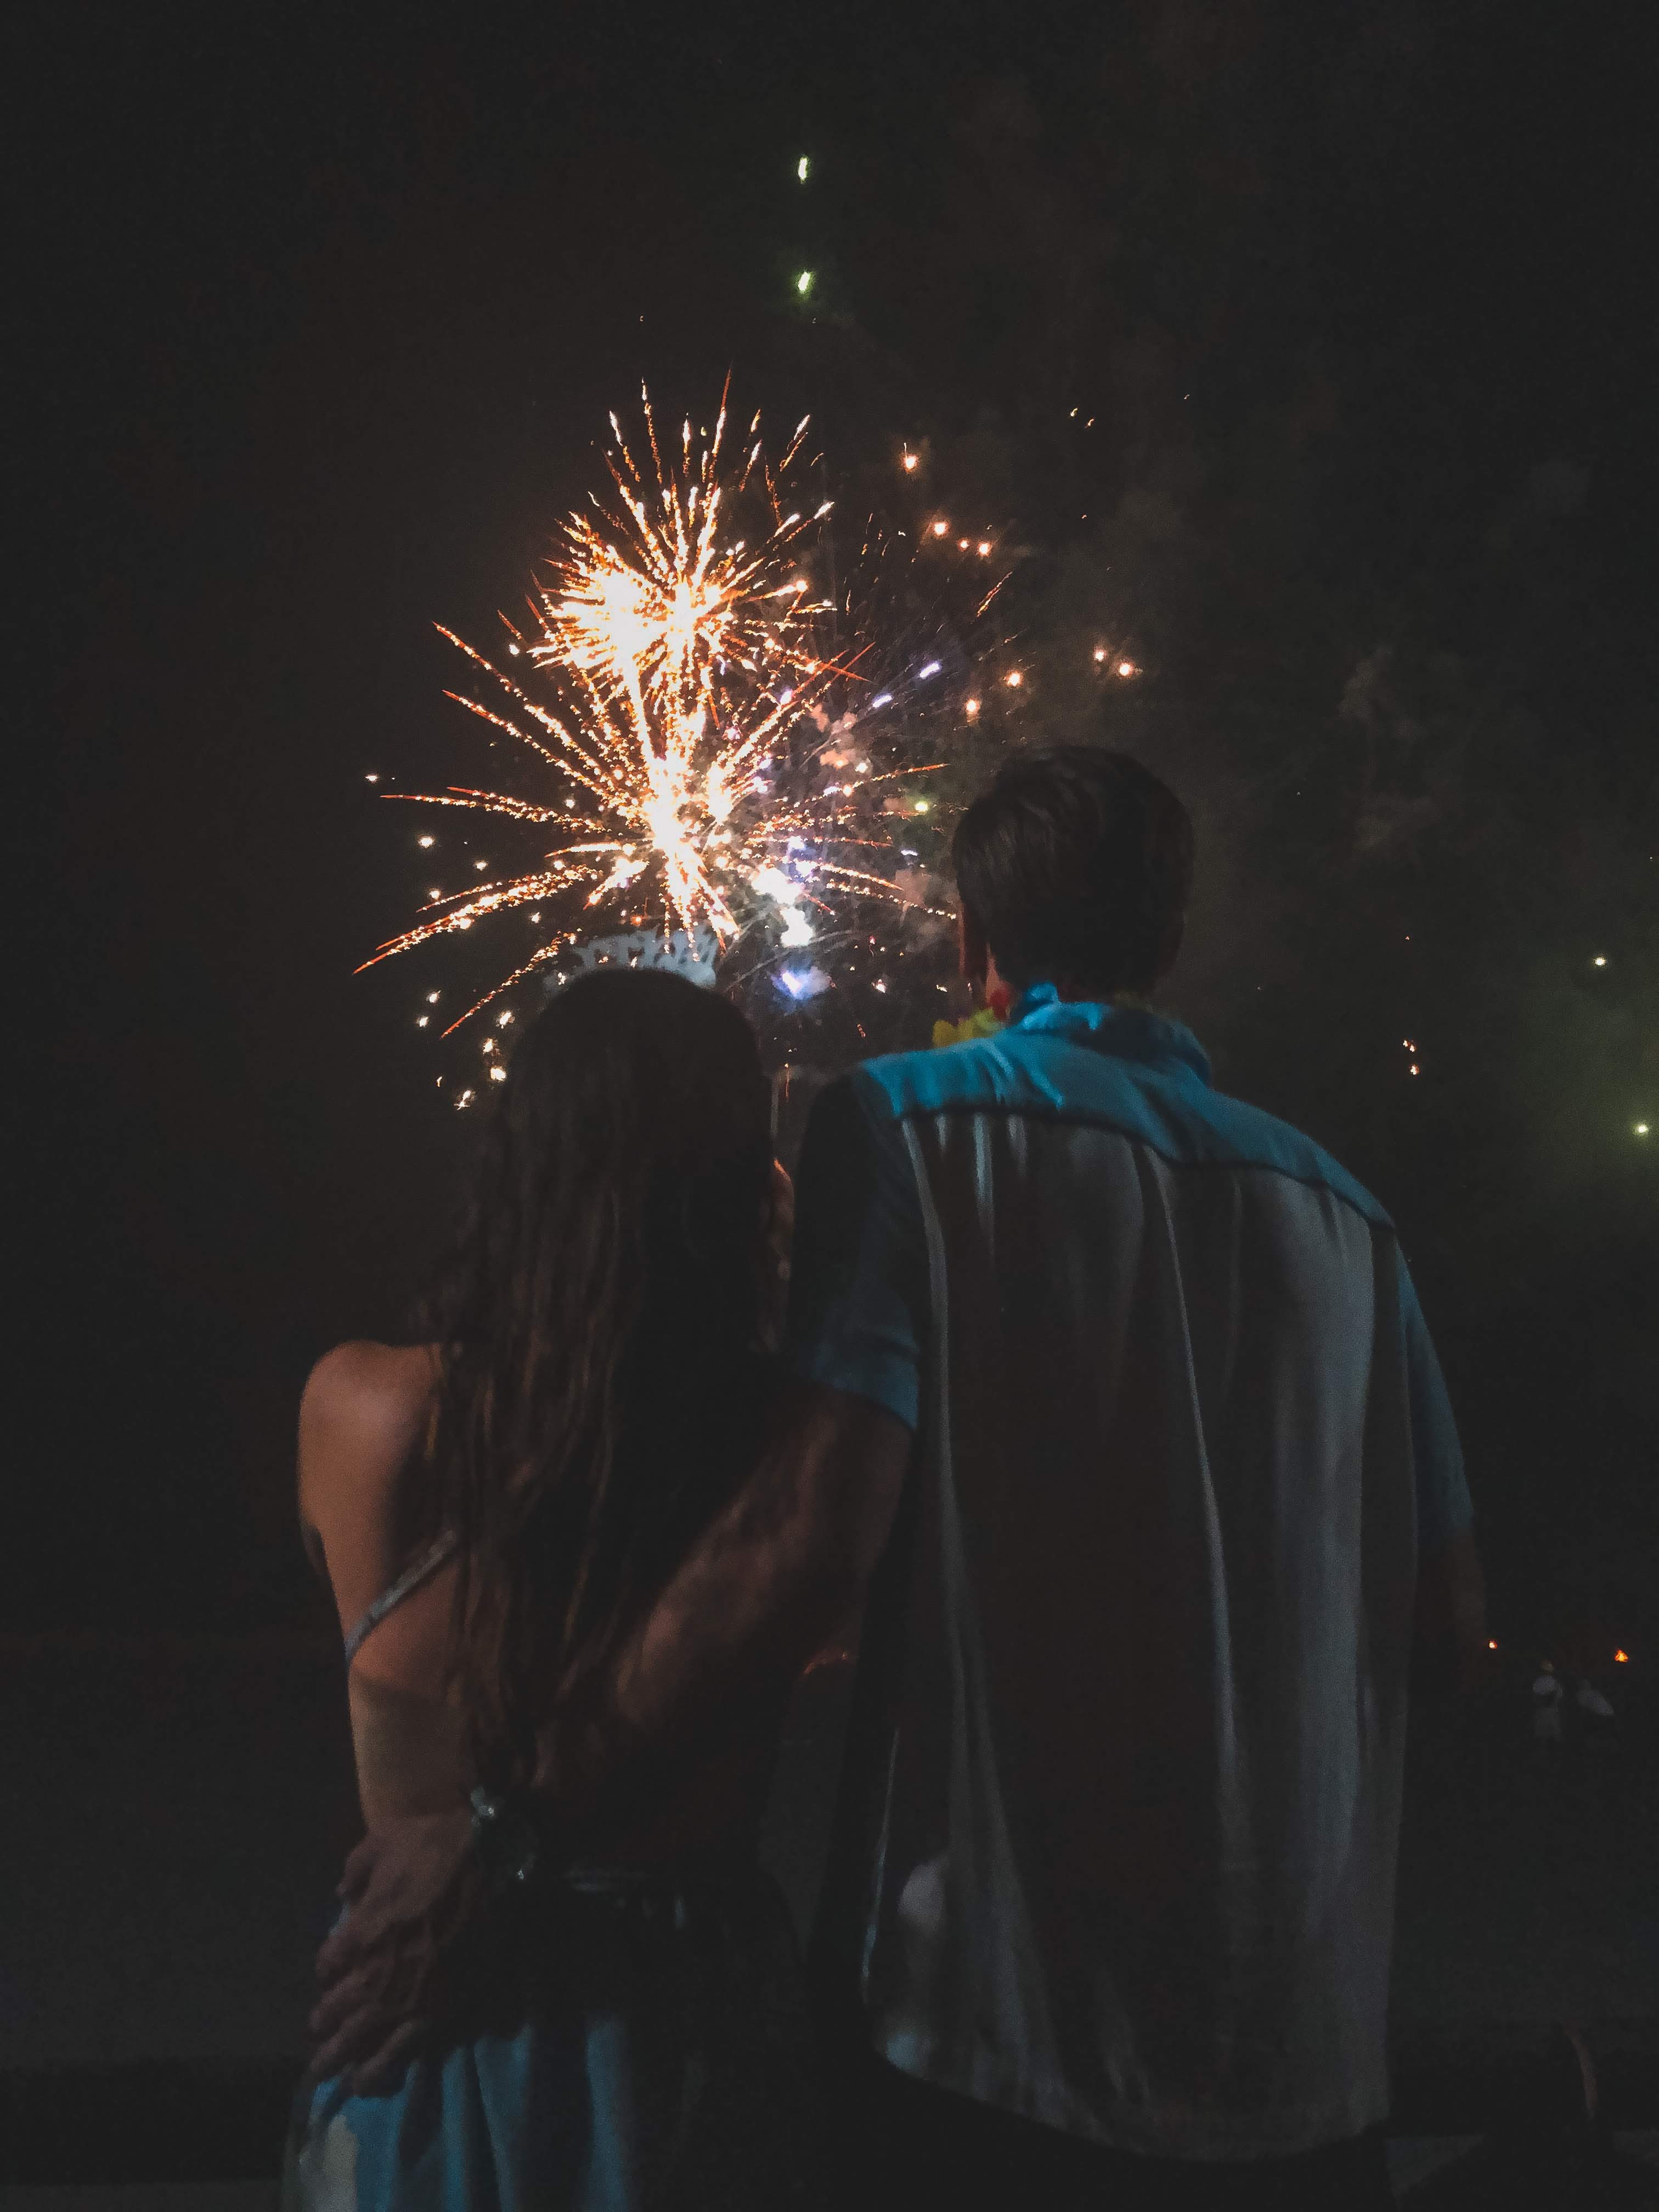 A couple looking at fireworks. | Source: Unsplash